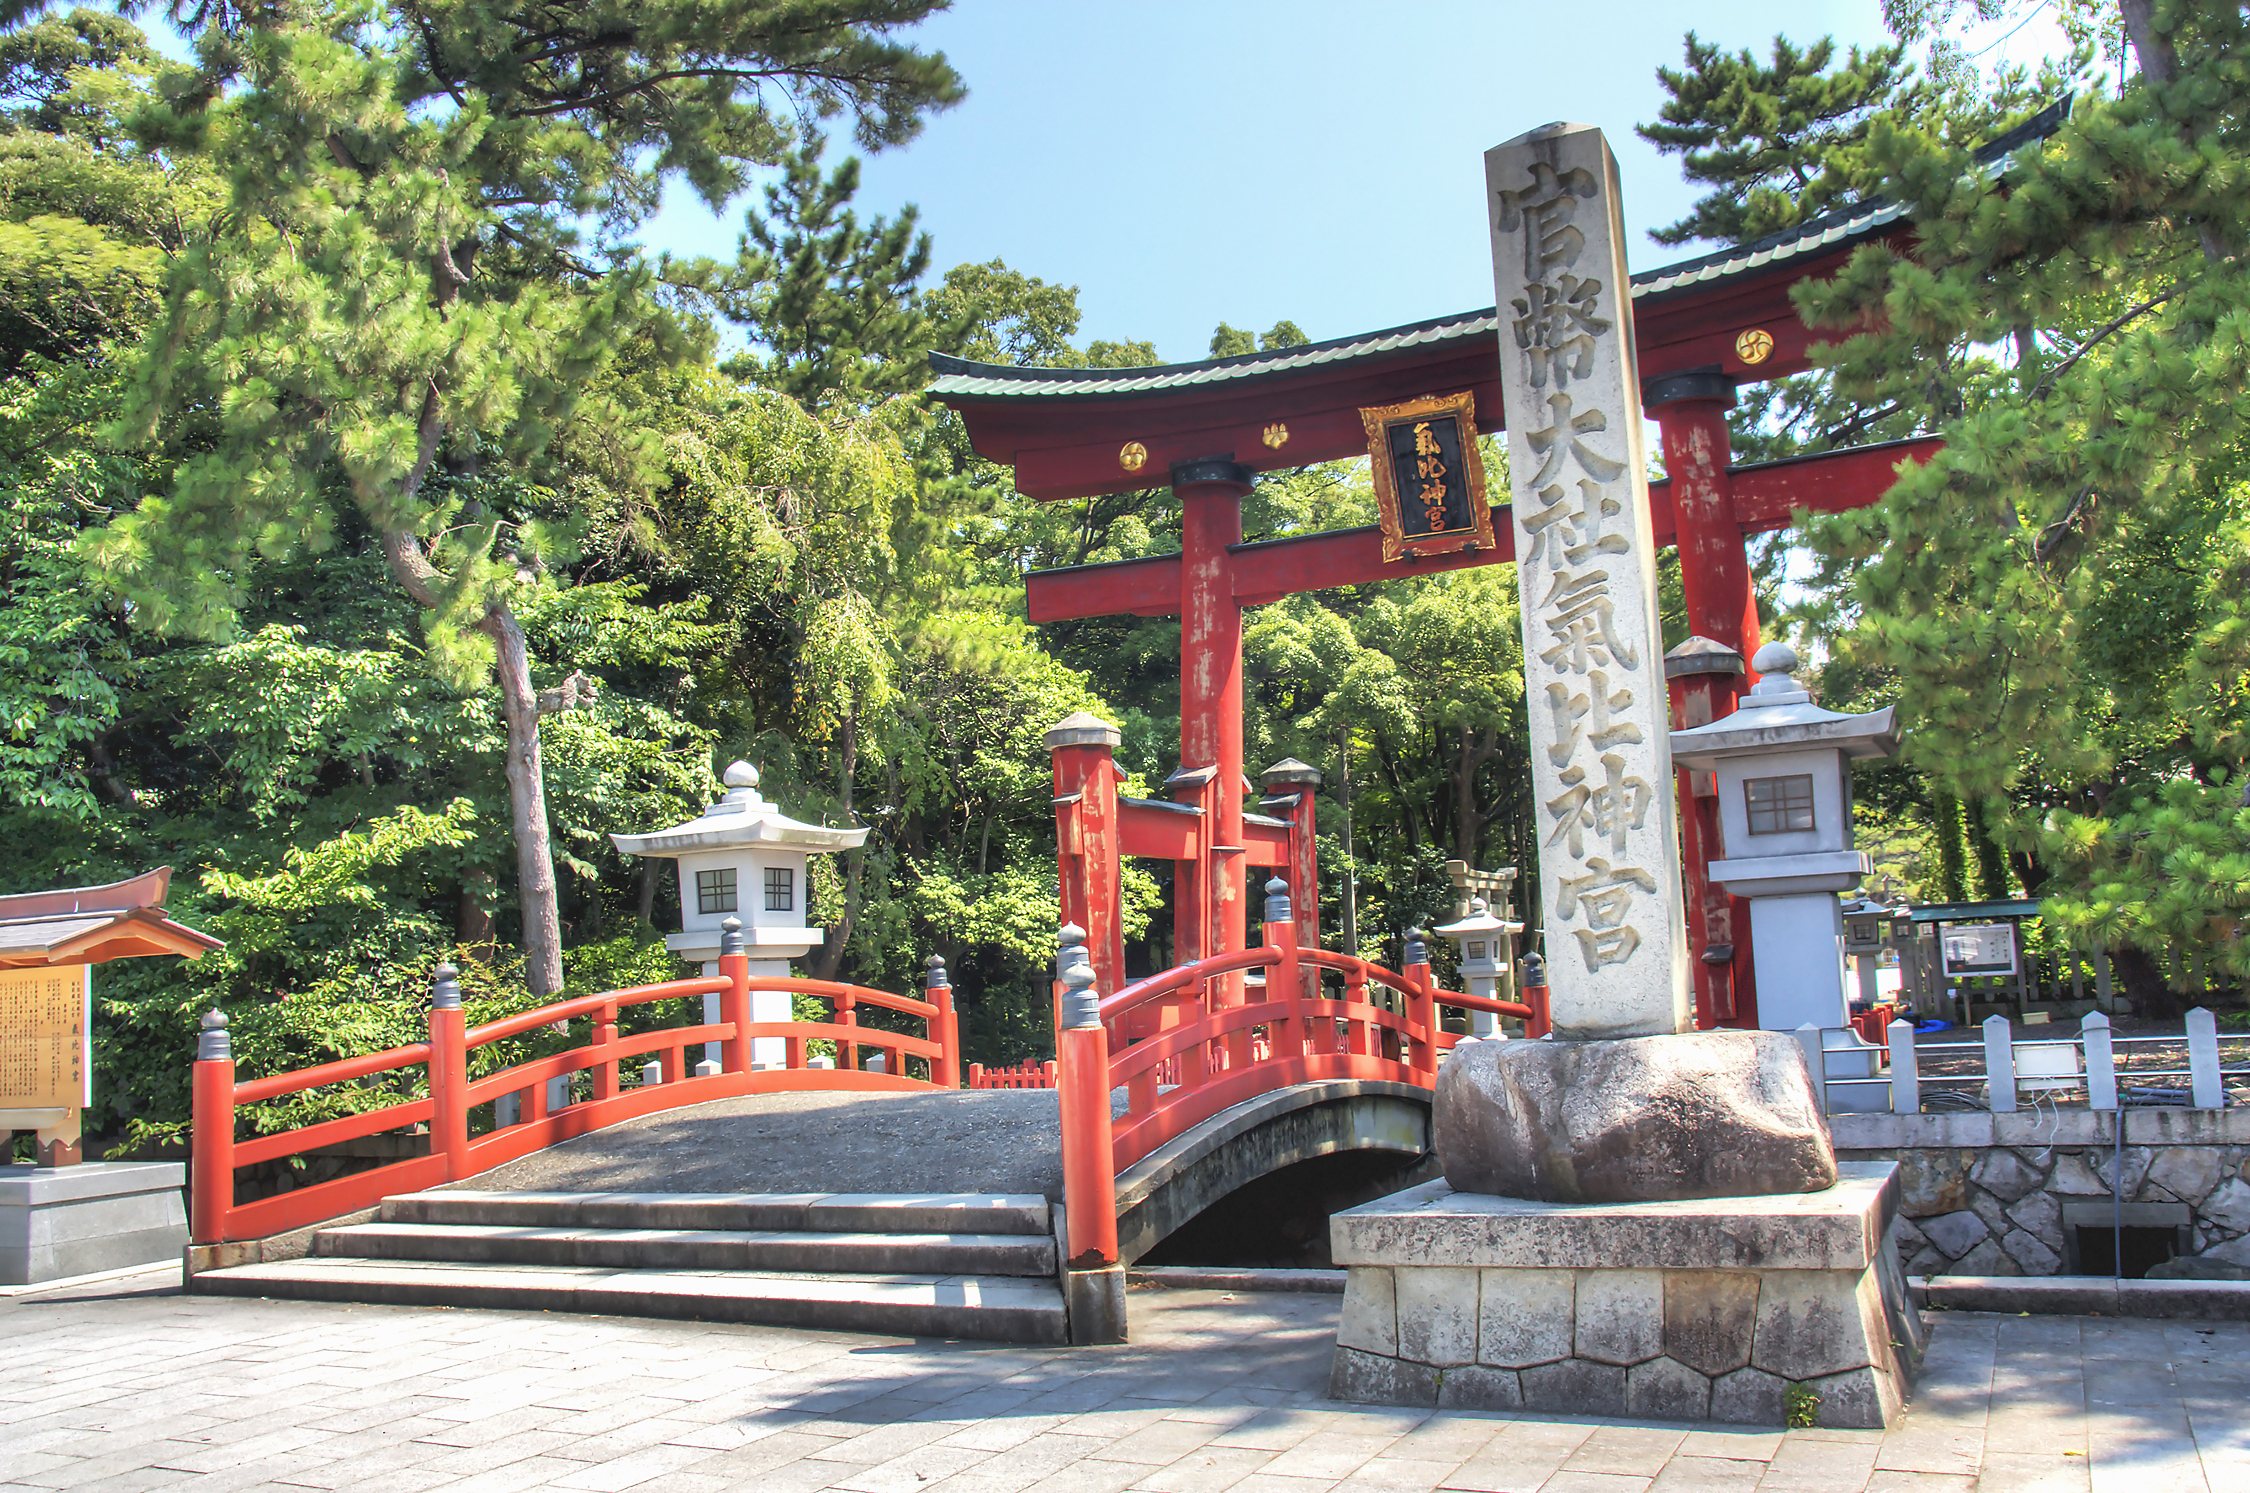 Grand entrance: The vermillion torii at Kehi Jingu was last rebuilt in 1645, and is one of the three greatest wooden shrine gates in Japan. | ALON ADIKA PHOTO